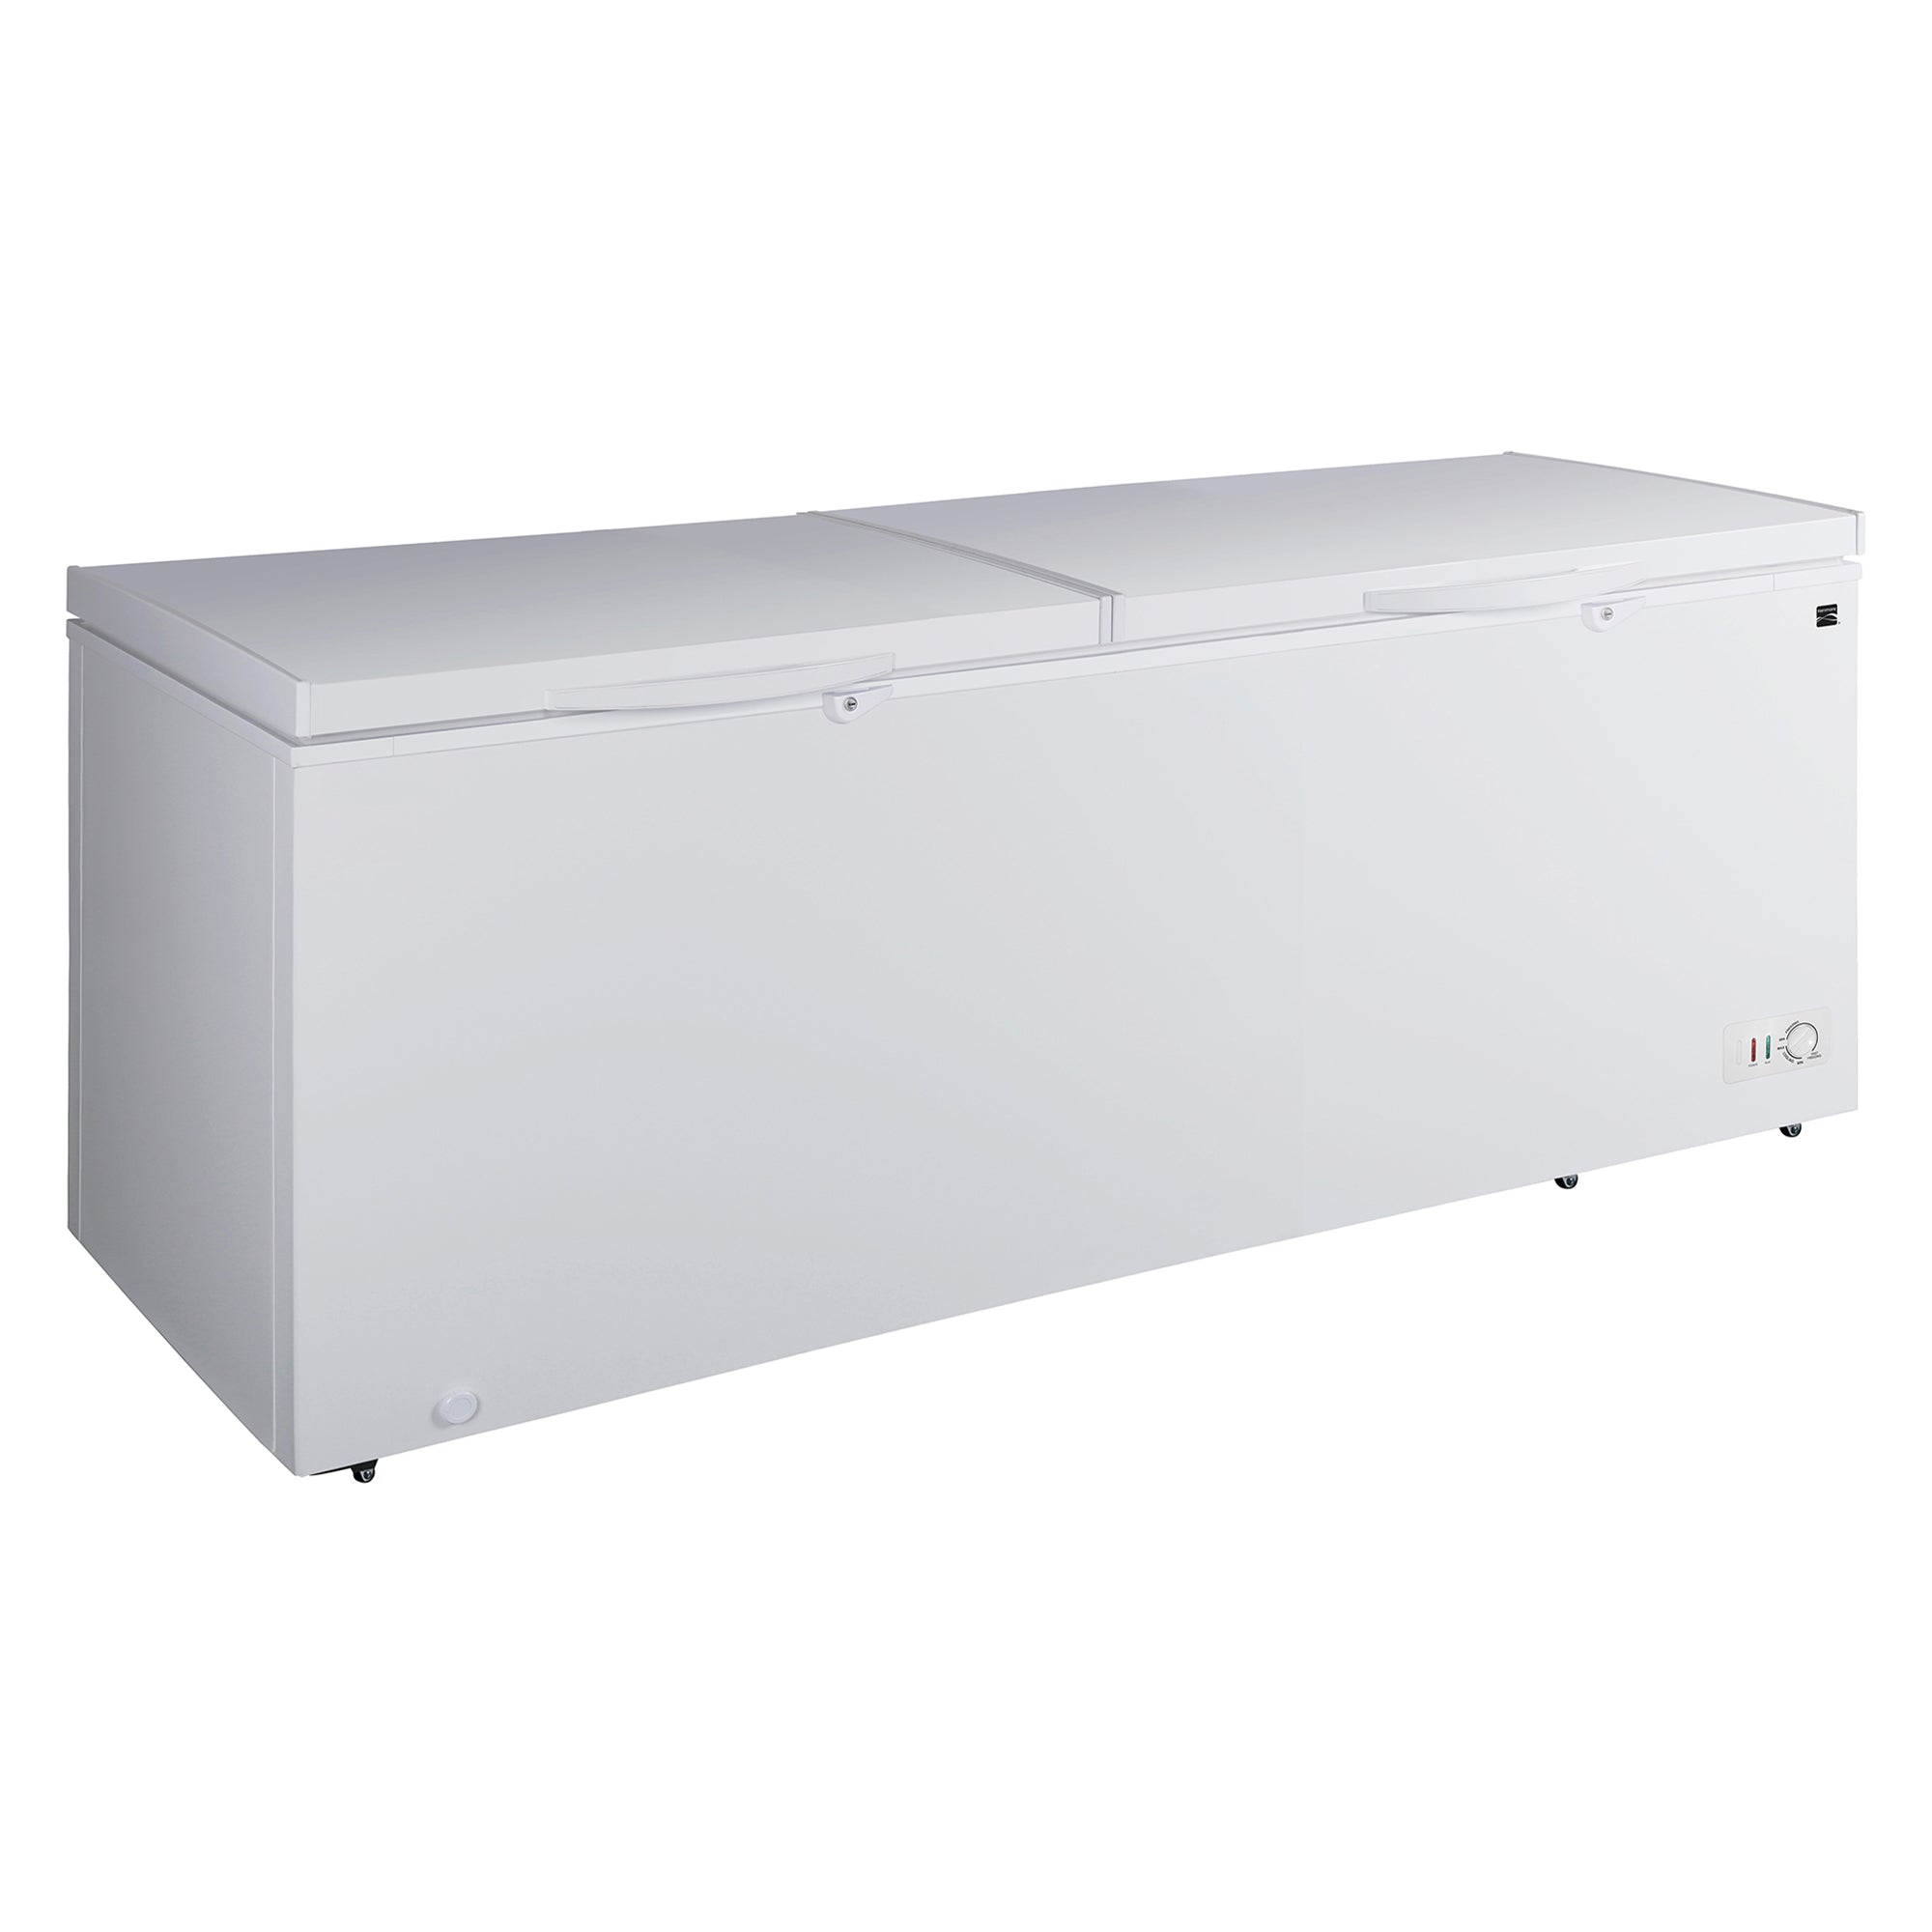 Kenmore convertible chest freezer/refrigerator, open, on a white background.